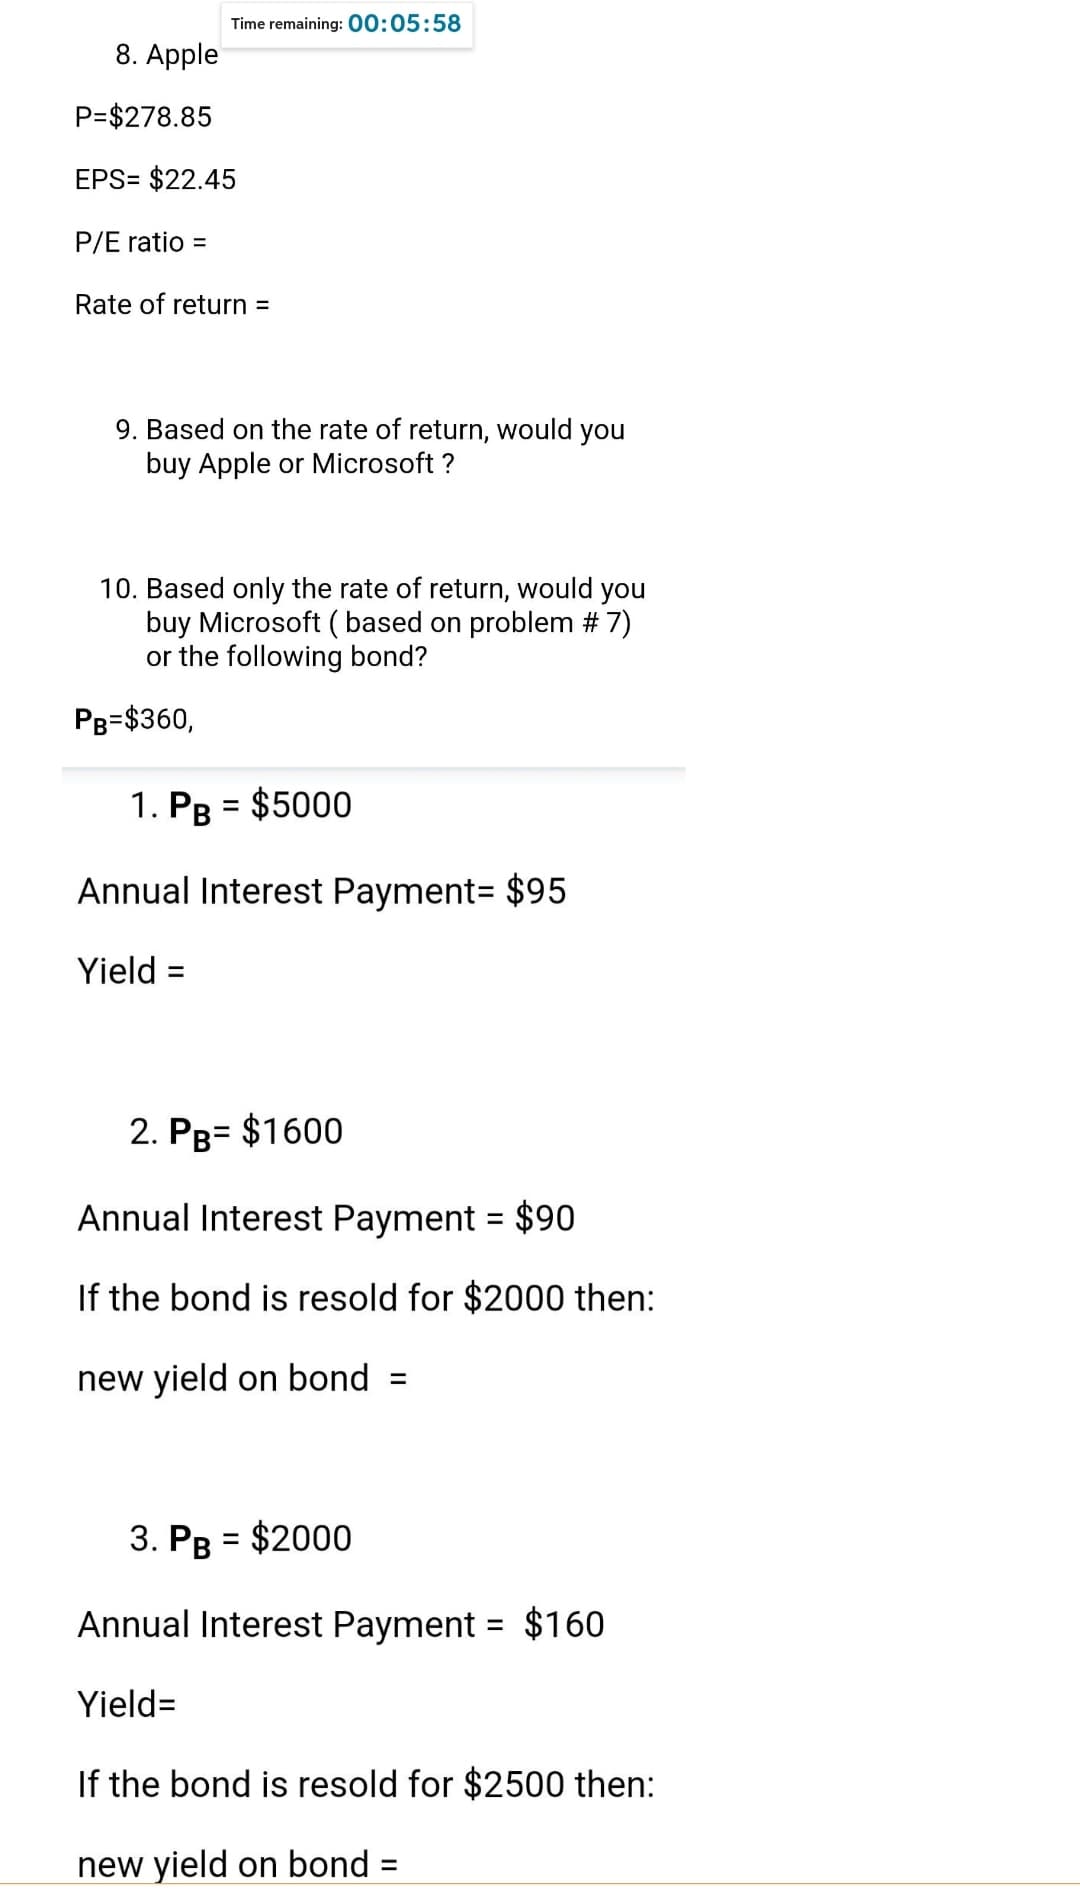 Time remaining: 00:05:58
8. Apple
P=$278.85
EPS= $22.45
P/E ratio =
Rate of return =
9. Based on the rate of return, would you
buy Apple or Microsoft ?
10. Based only the rate of return, would you
buy Microsoft (based on problem # 7)
or the following bond?
PB=$360,
1. PB = $5000
Annual Interest Payment = $95
Yield =
2. PB= $1600
Annual Interest Payment = $90
If the bond is resold for $2000 then:
new yield on bond =
3. PB = $2000
Annual Interest Payment = $160
Yield=
If the bond is resold for $2500 then:
new yield on bond
=